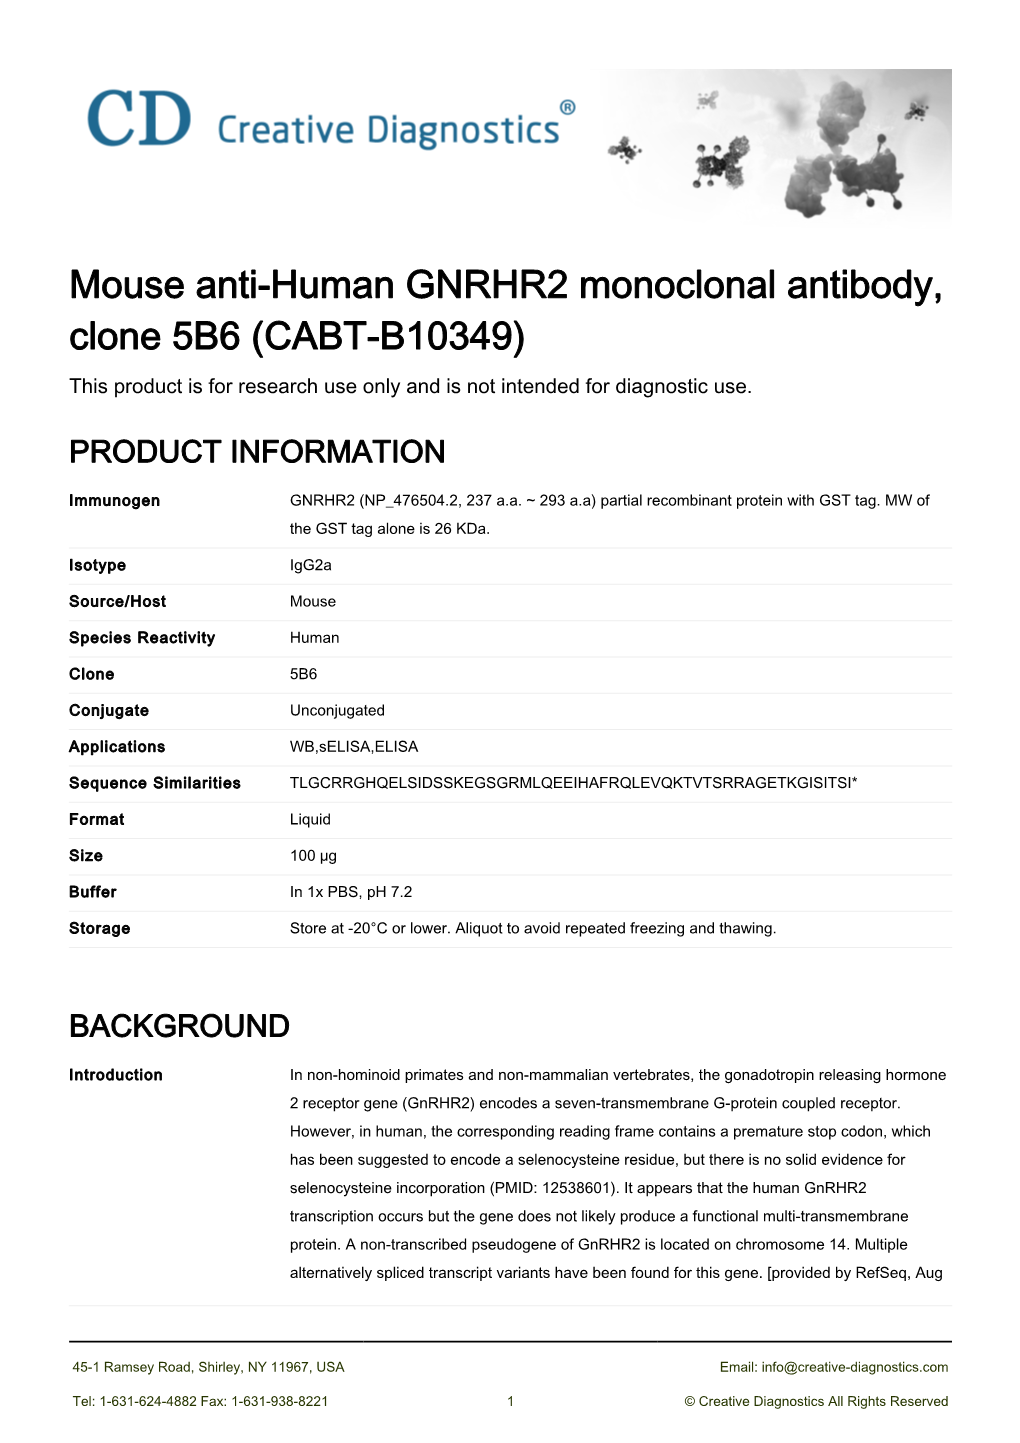 Mouse Anti-Human GNRHR2 Monoclonal Antibody, Clone 5B6 (CABT-B10349) This Product Is for Research Use Only and Is Not Intended for Diagnostic Use